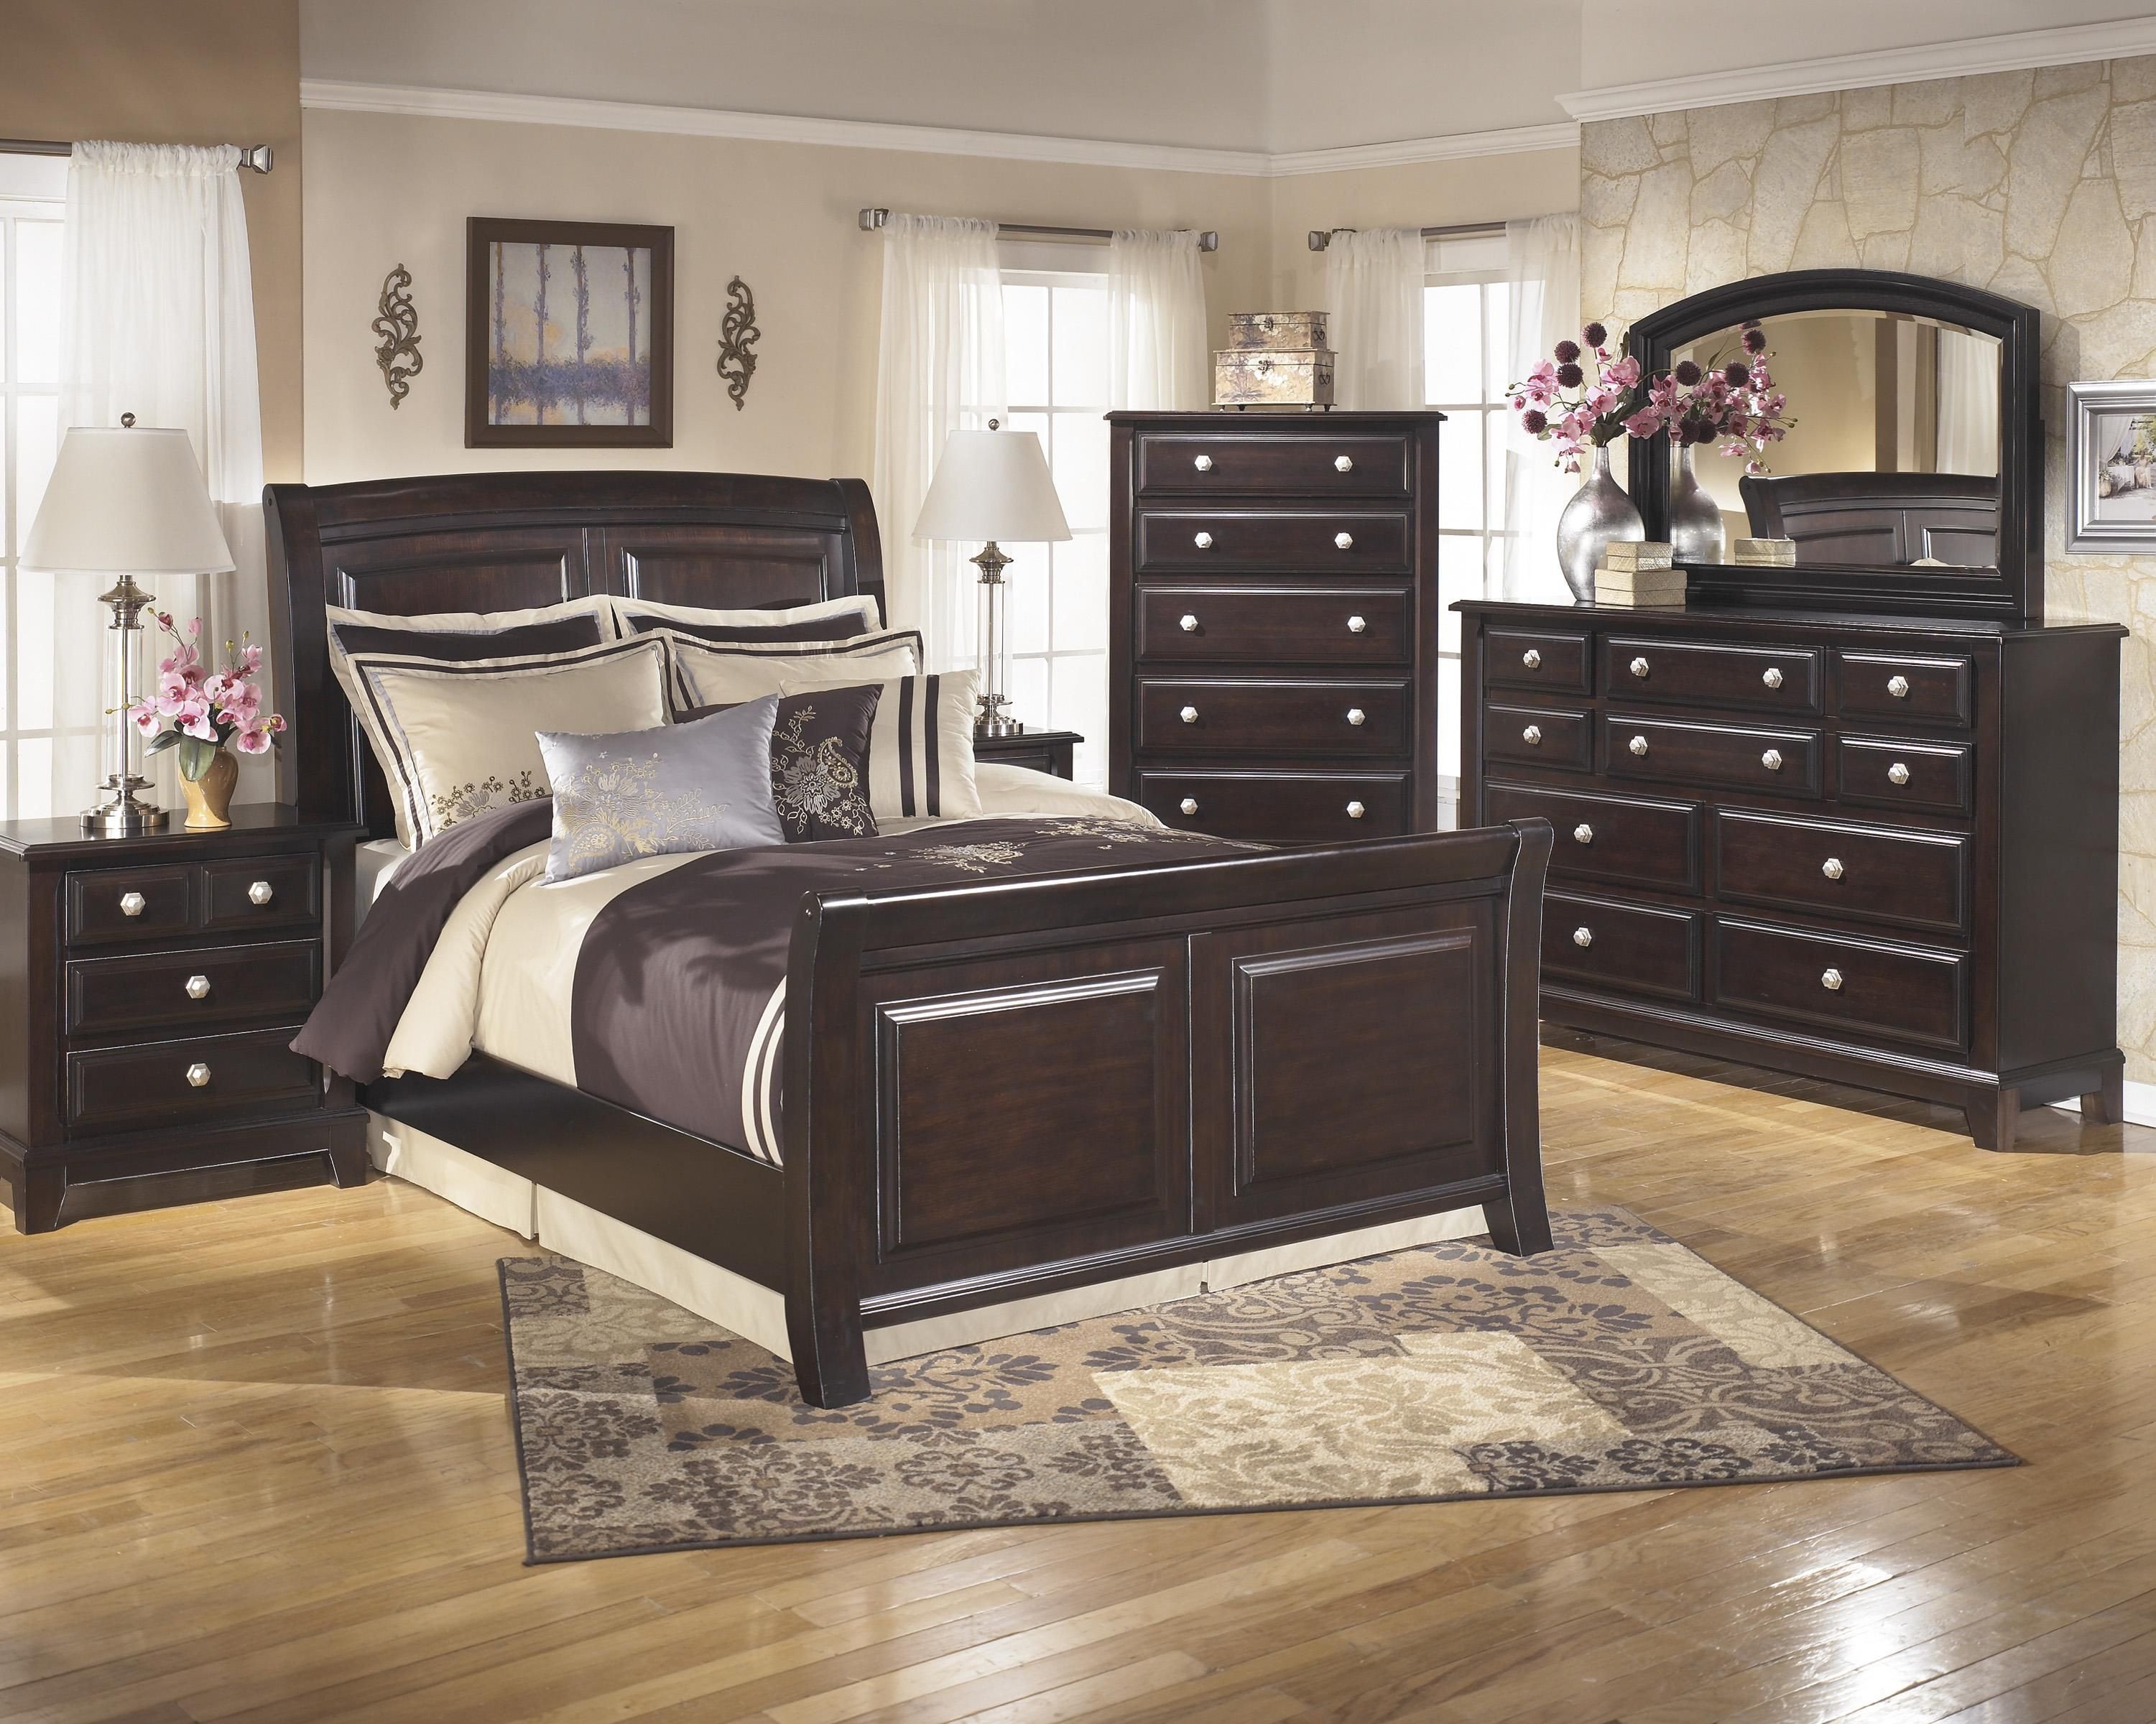 Ashley White Bedroom Set New Ridgley King Bedroom Group by Signature Design by ashley